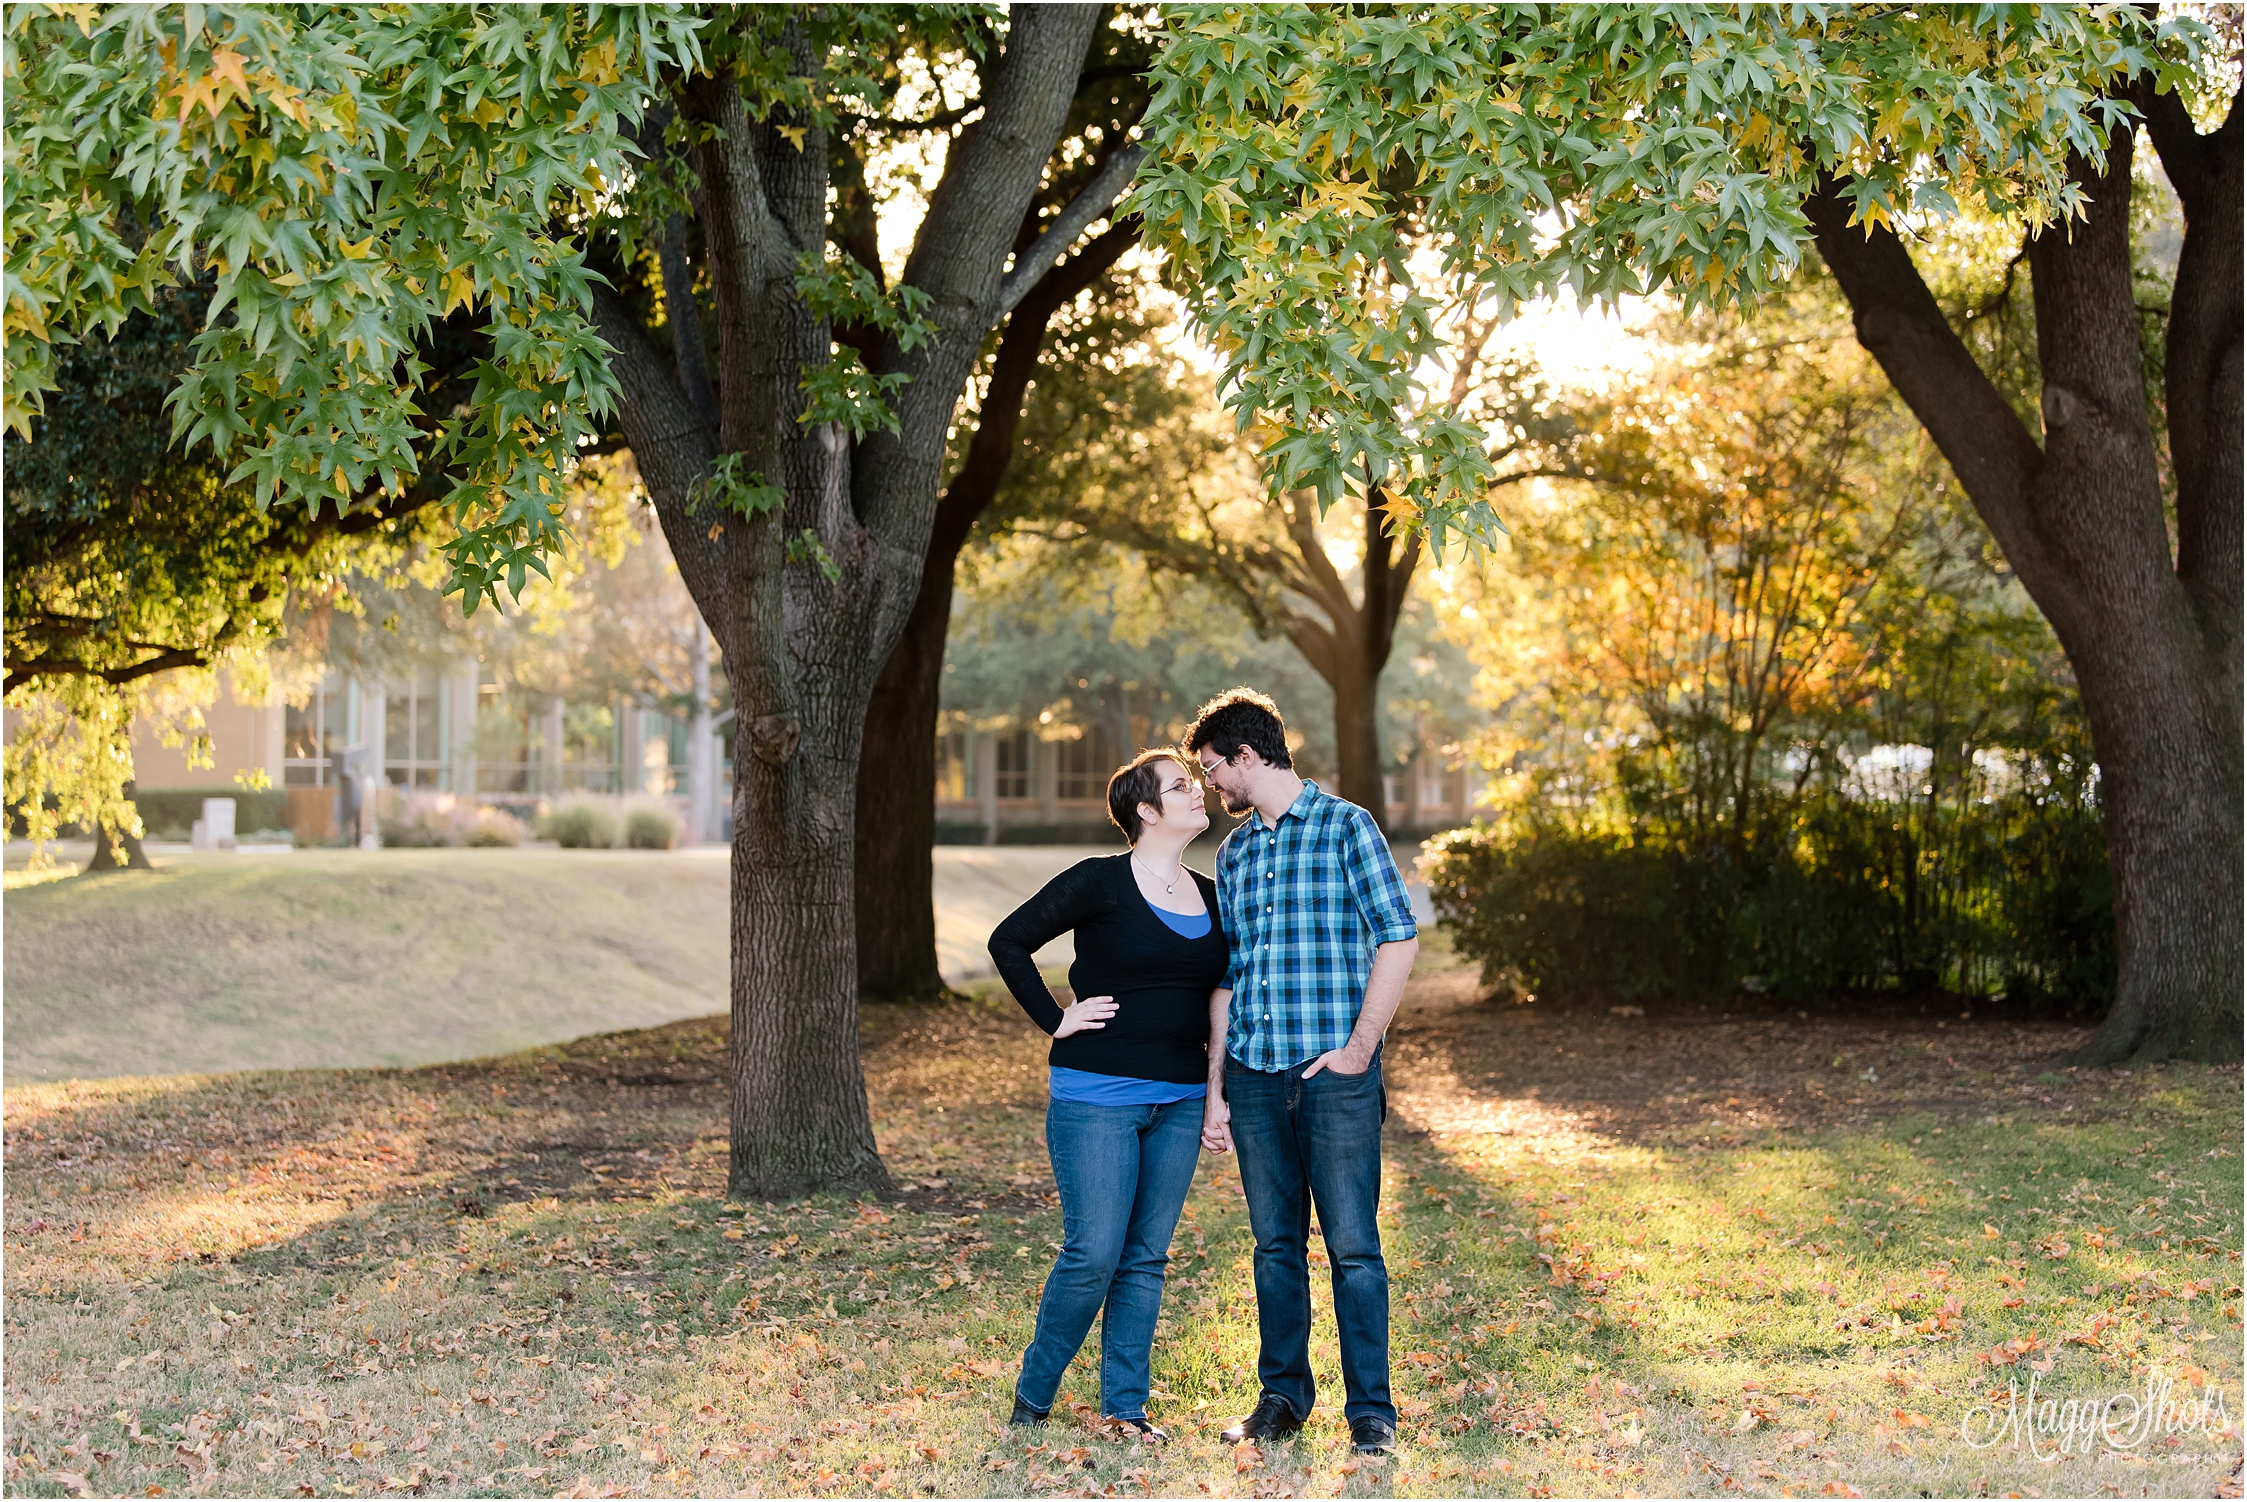 kate & andrew, love, shoot, engagement shoot, MaggShots Photography, MaggShots, Professional Photography, Professional Photographer, Denton Square, Trees